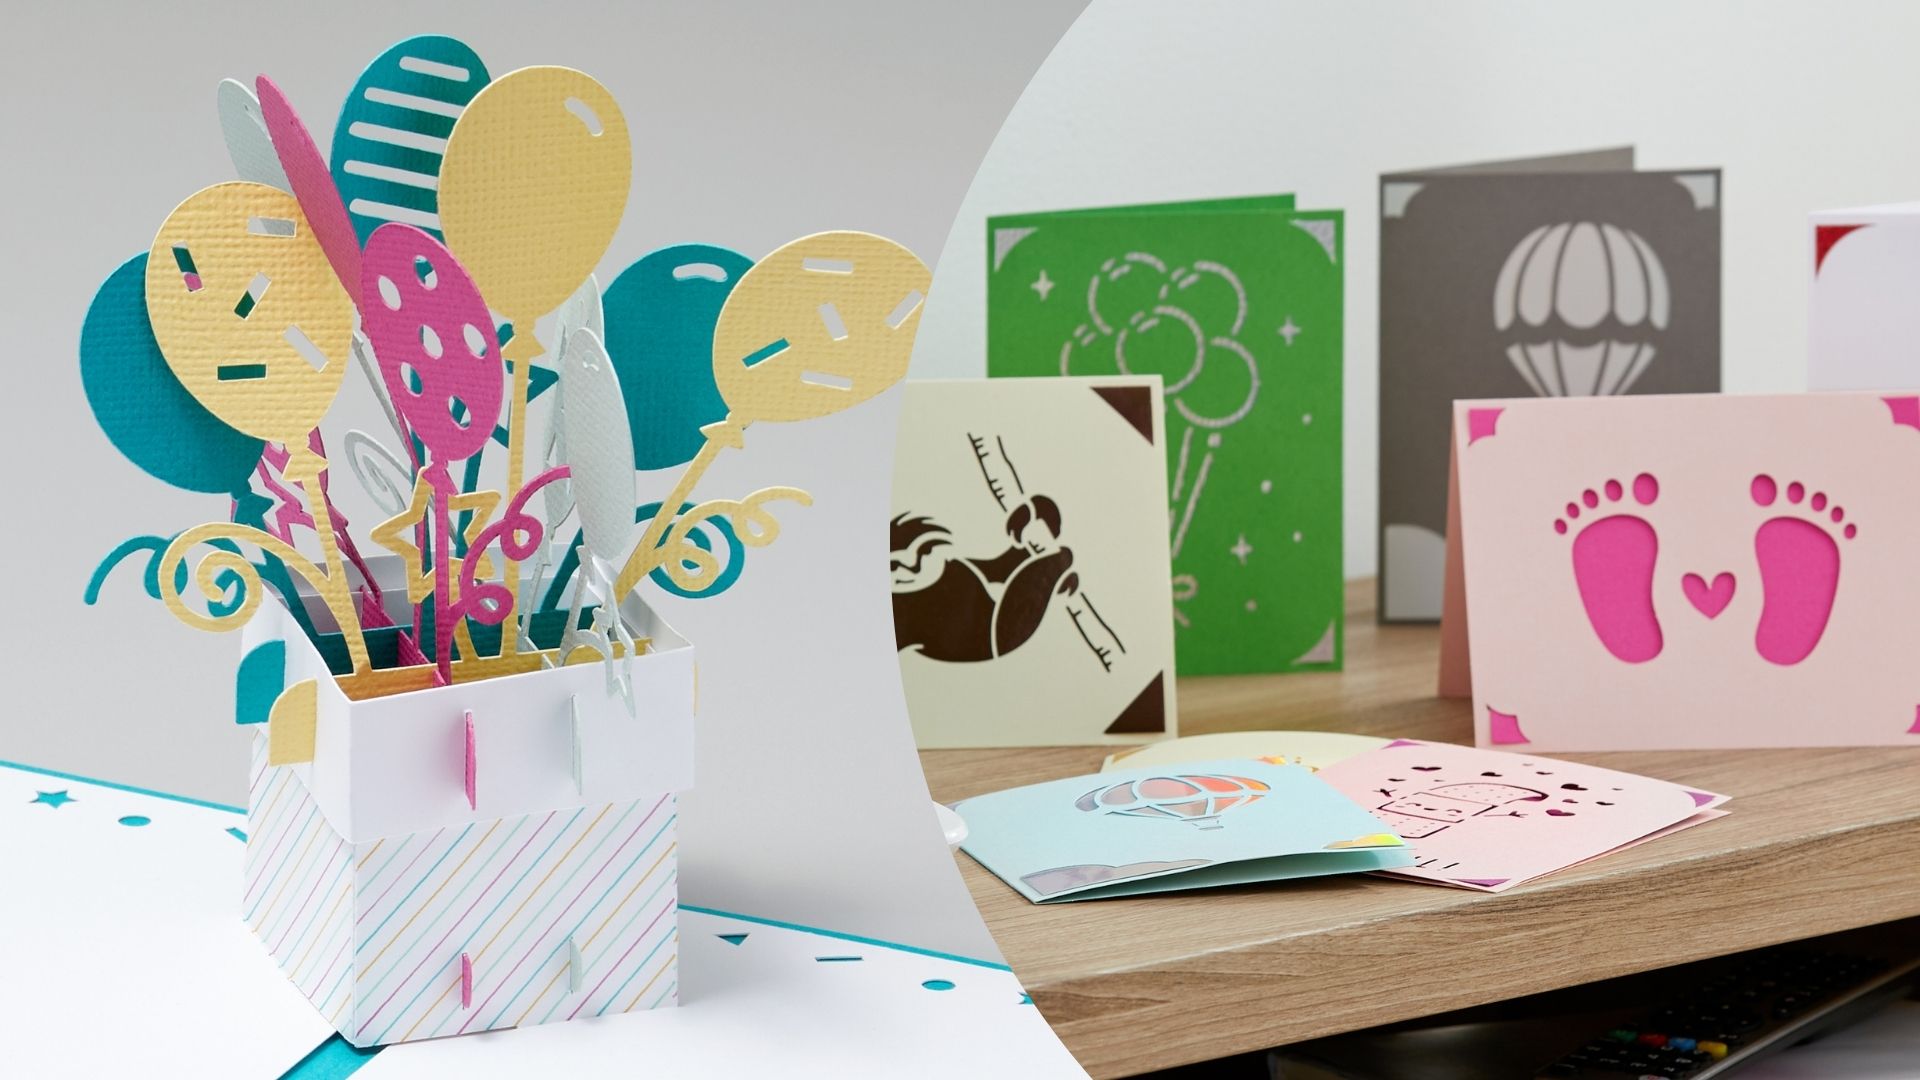 Cricut Cardmaking tips to get you started